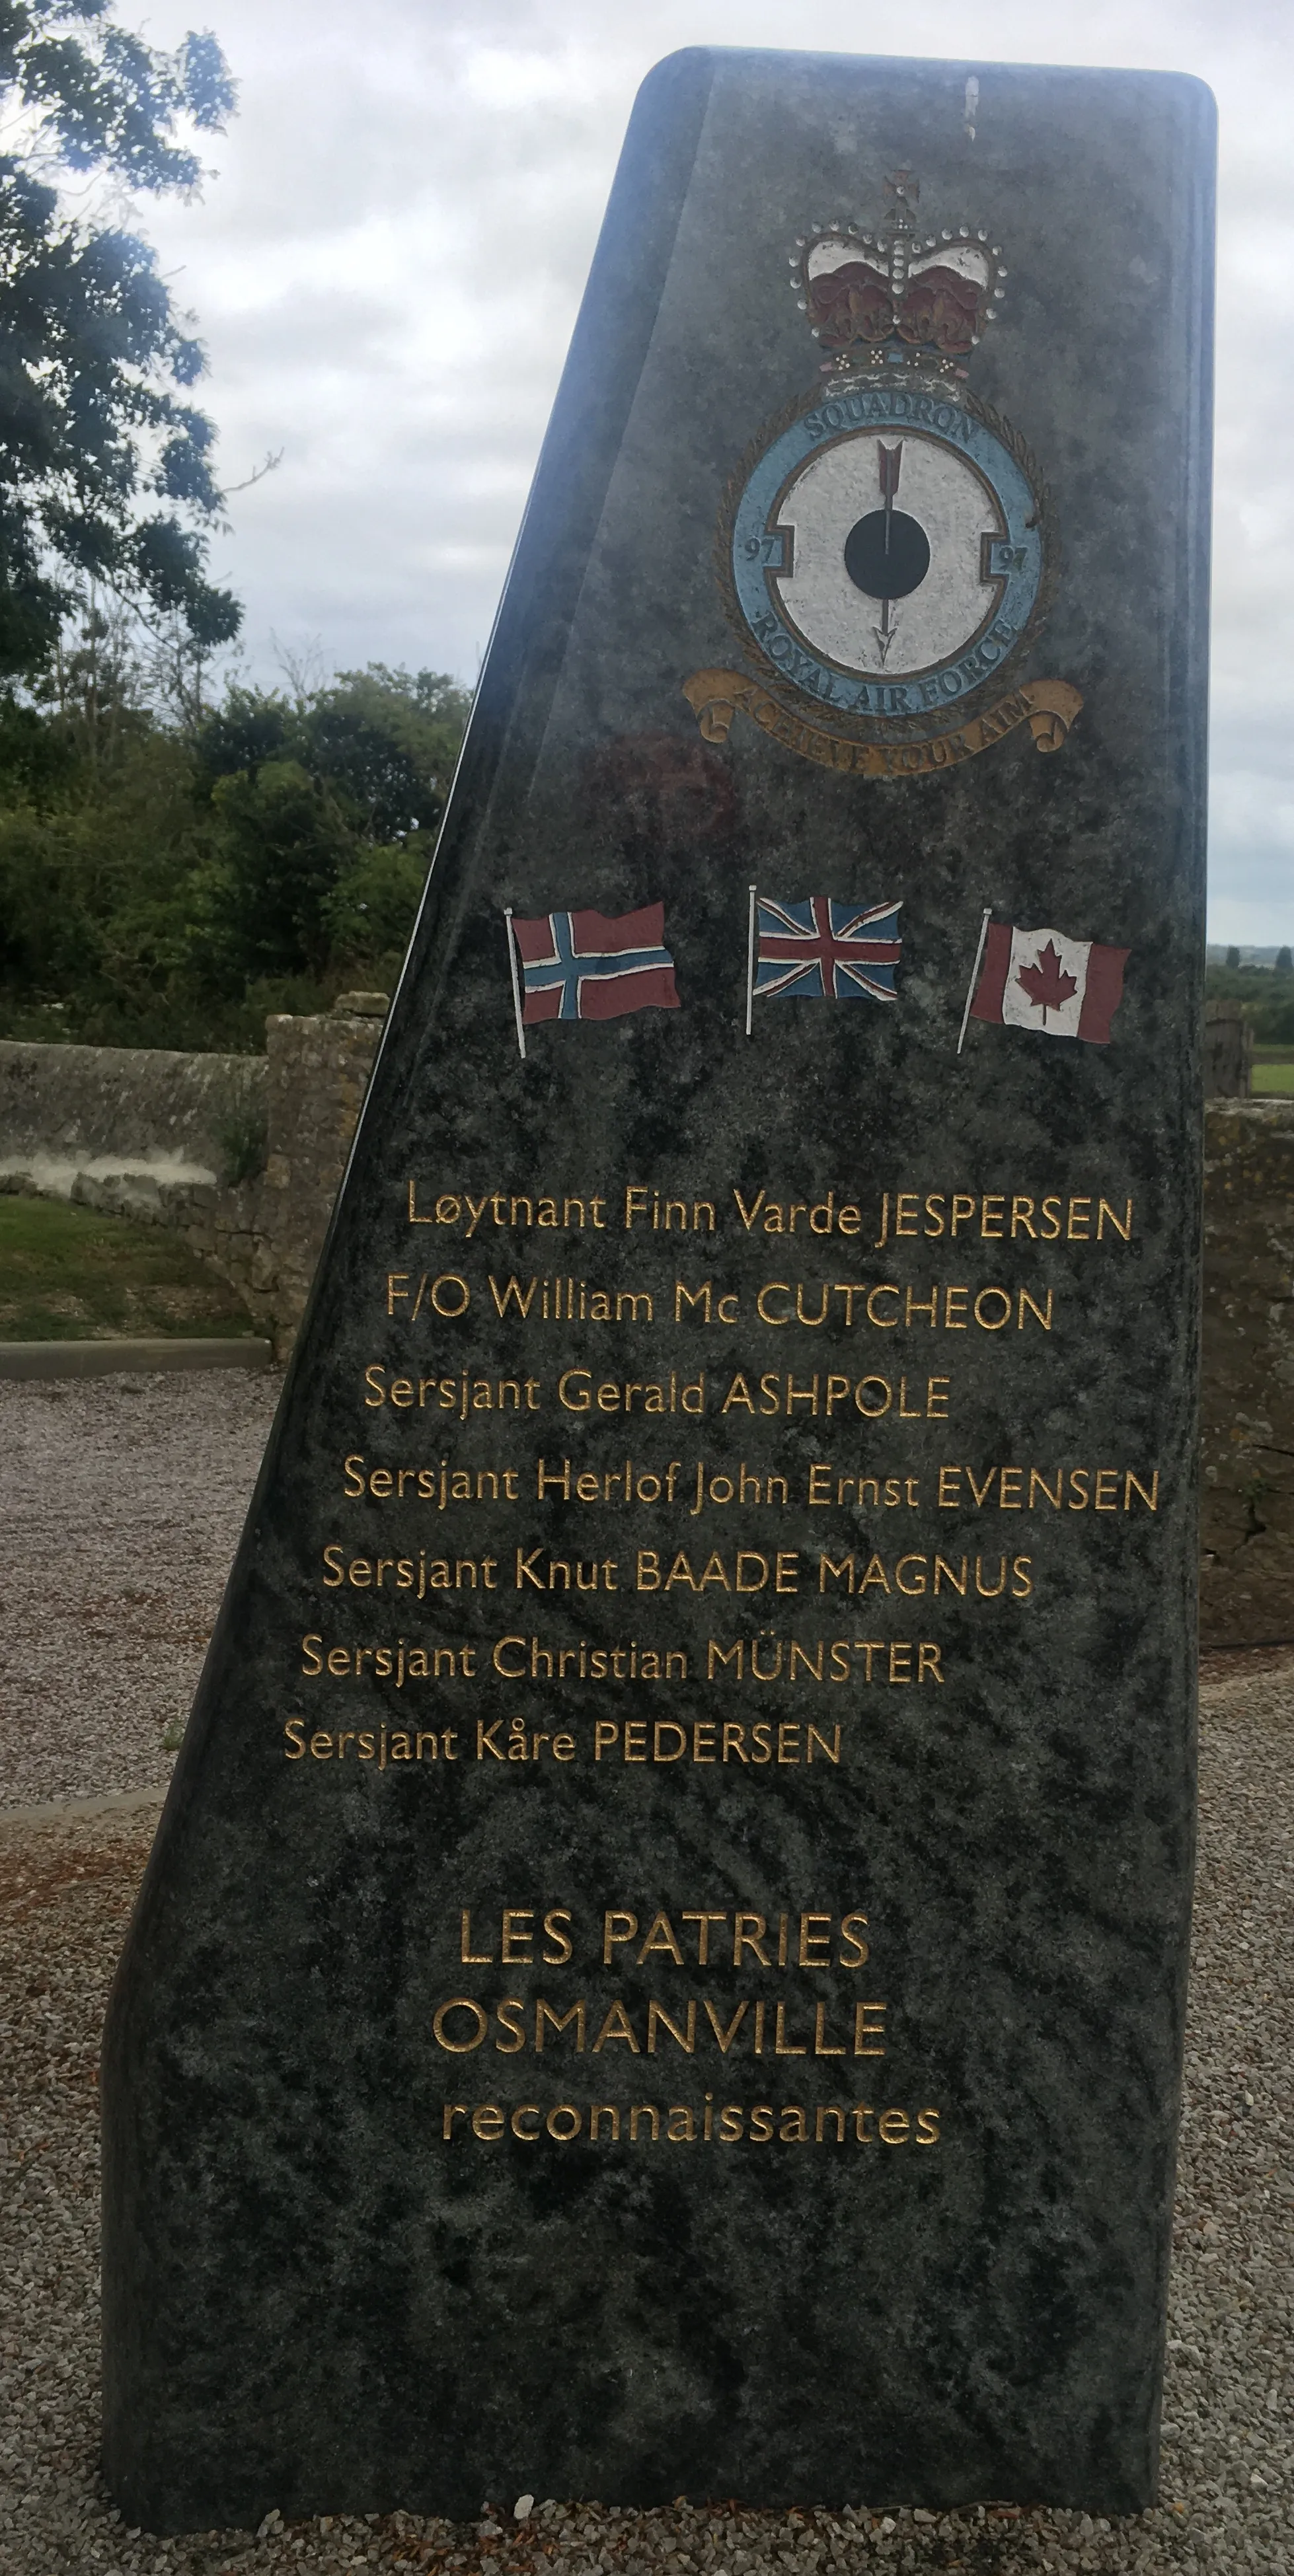 Photo showing: Stele listing members of the Royal Air Force that died in Osmanville during the battle of Normandy